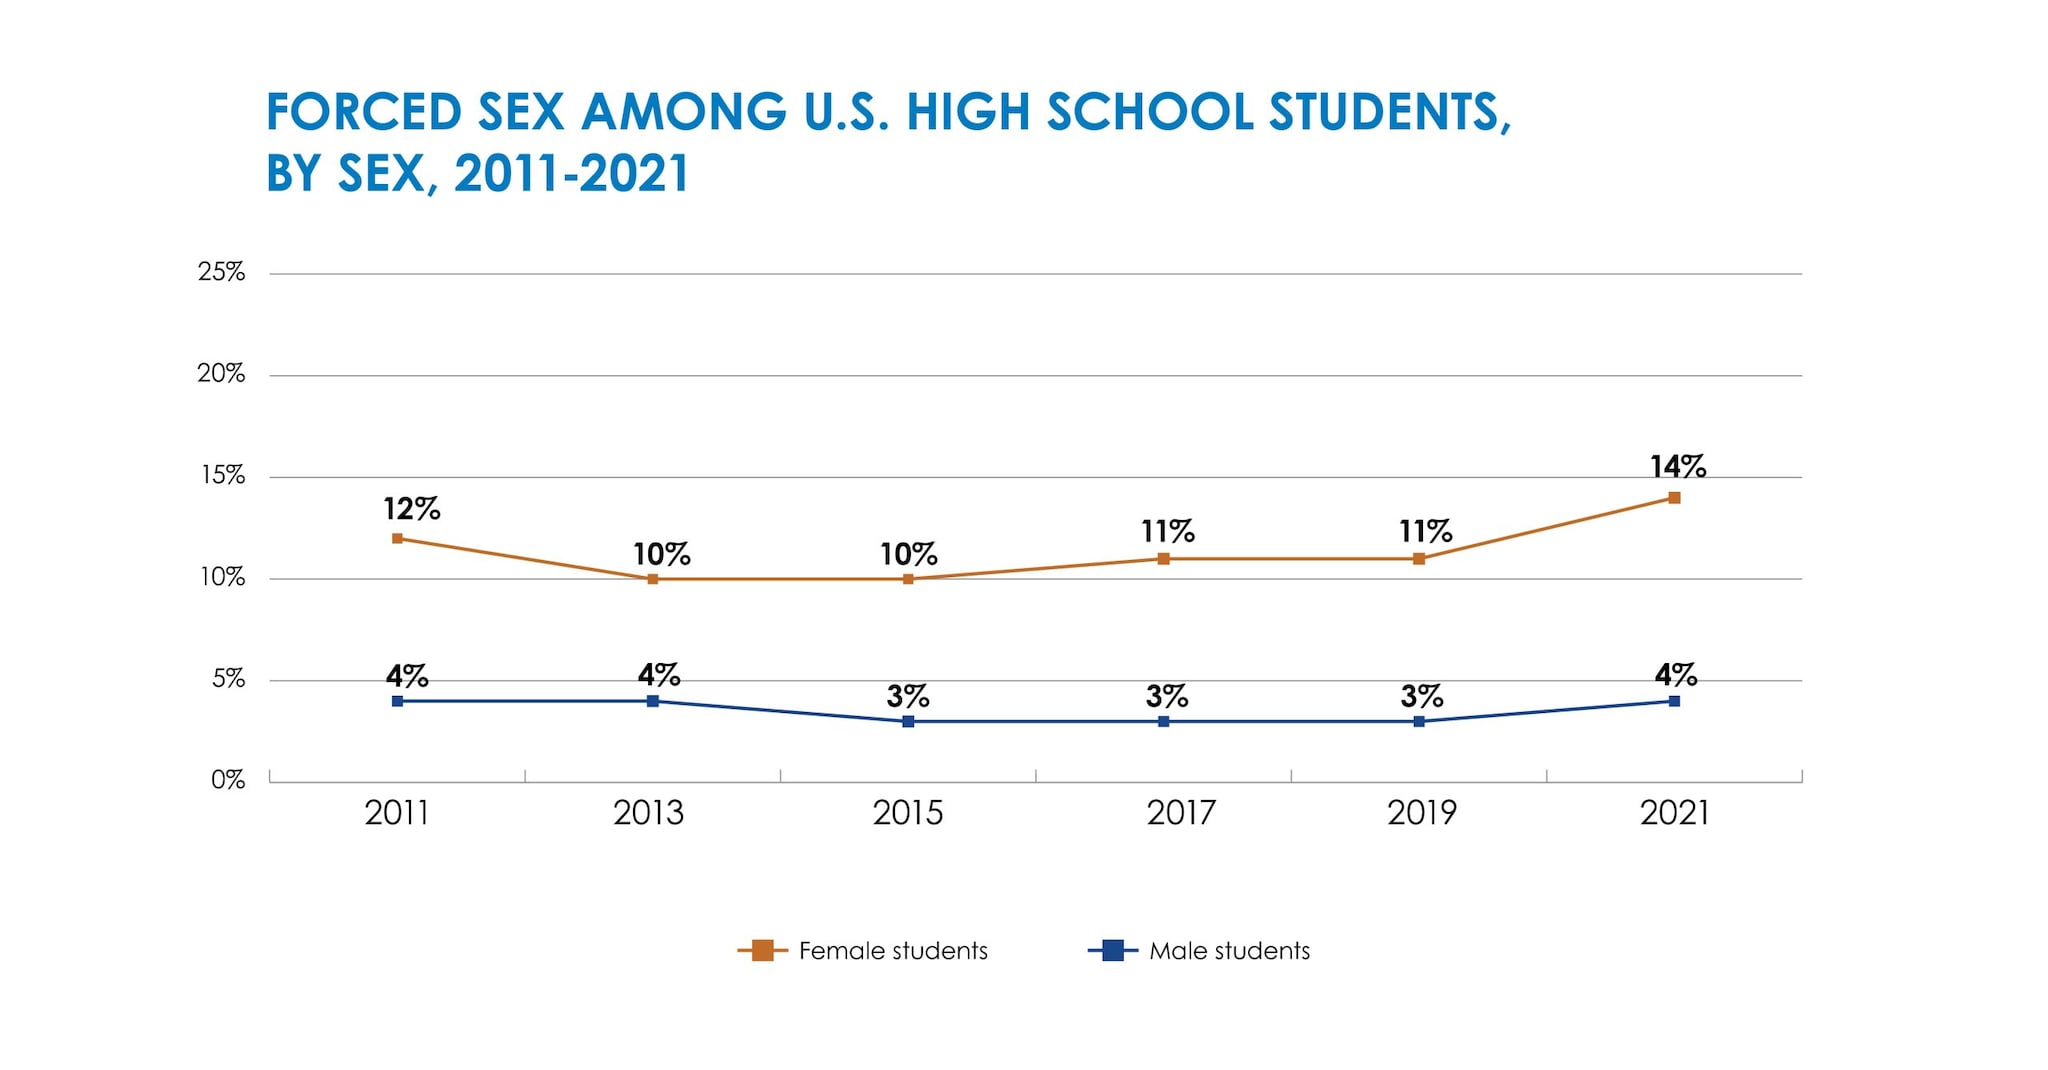 A double line graph showing 2011-2021 U.S. student data on forced sex by sex, with girls reporting higher levels of forced sex compared to boys